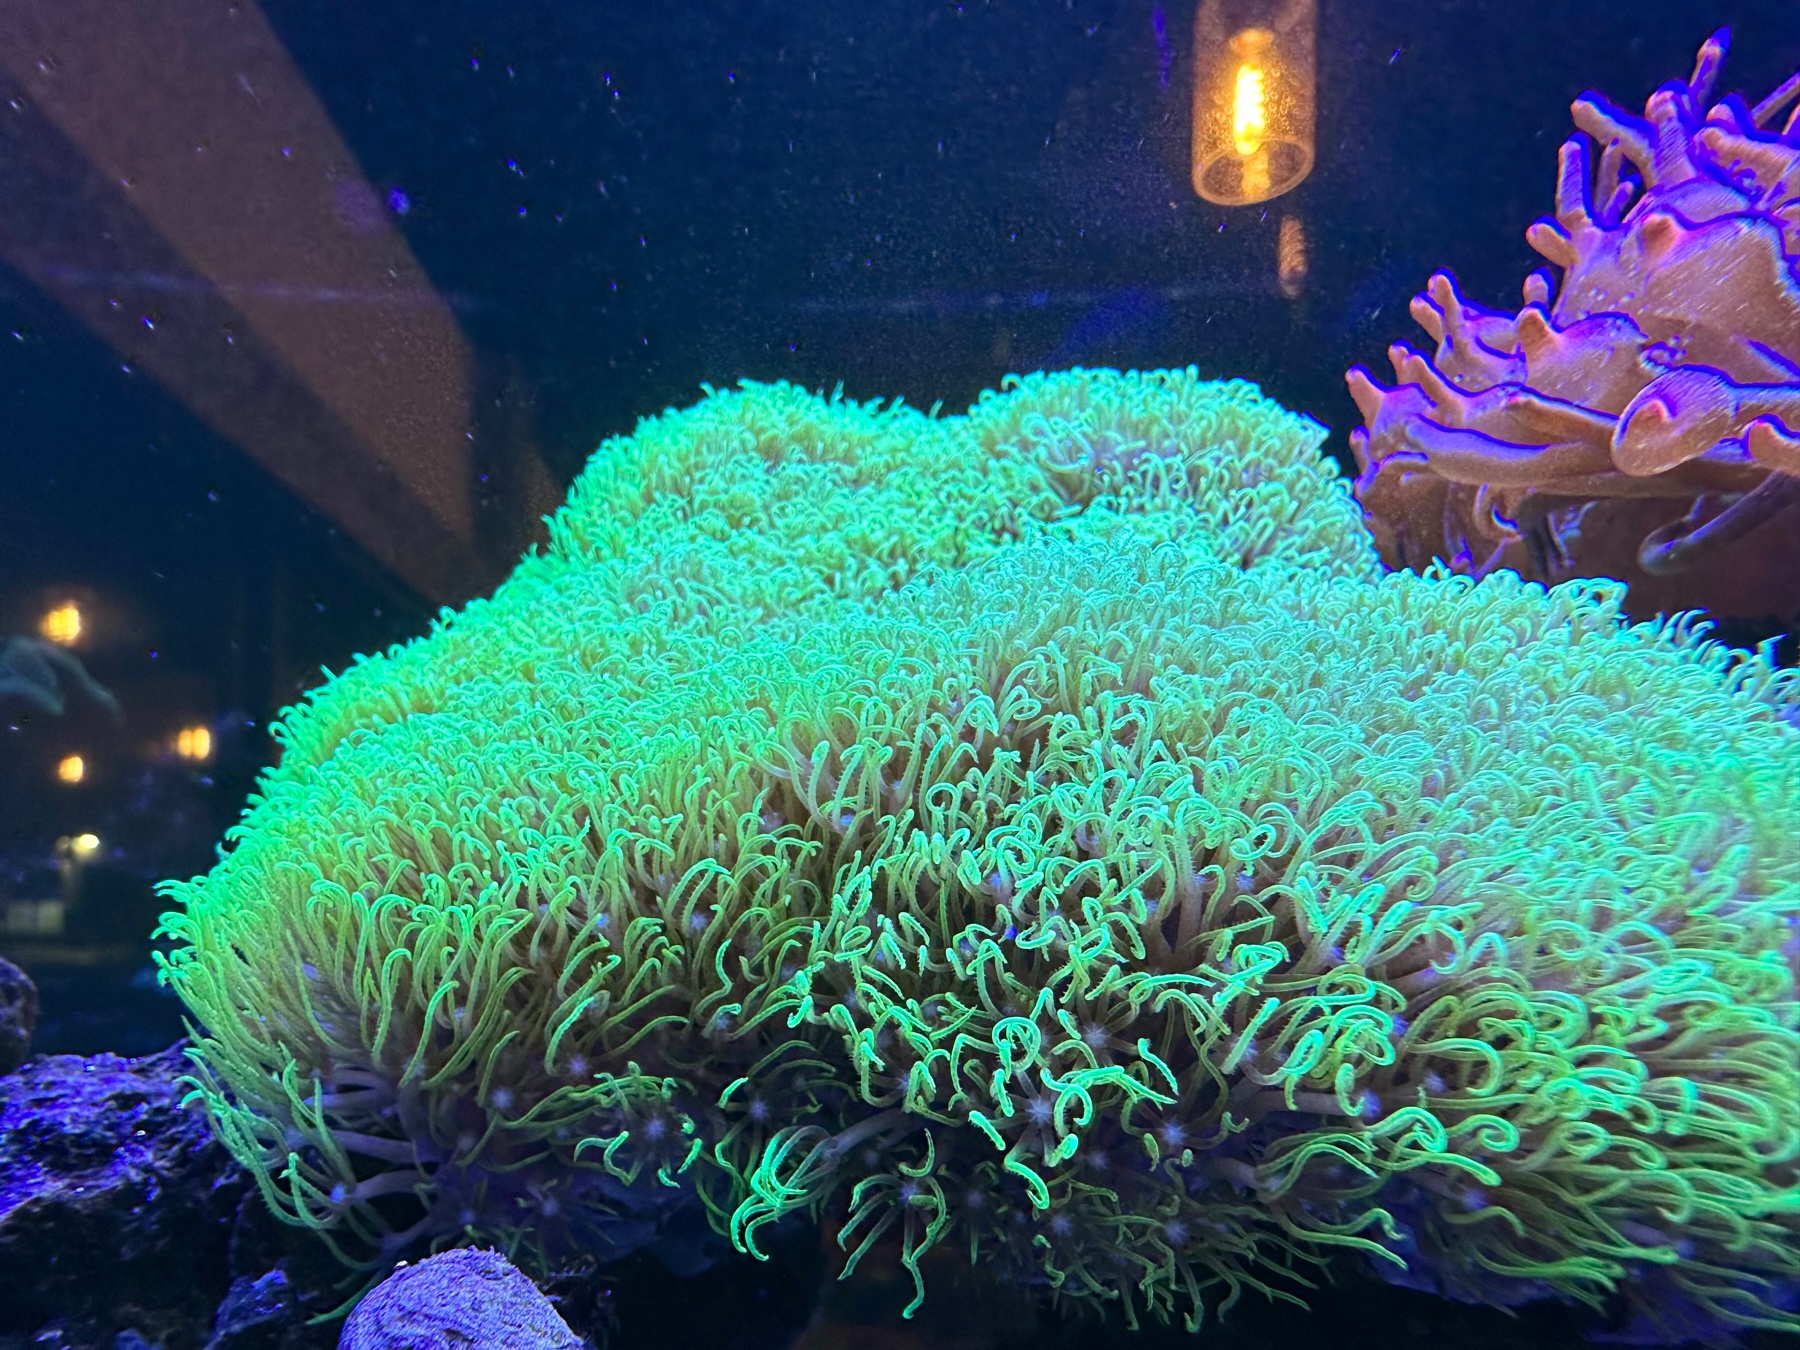 Green anemone in a fish tank.